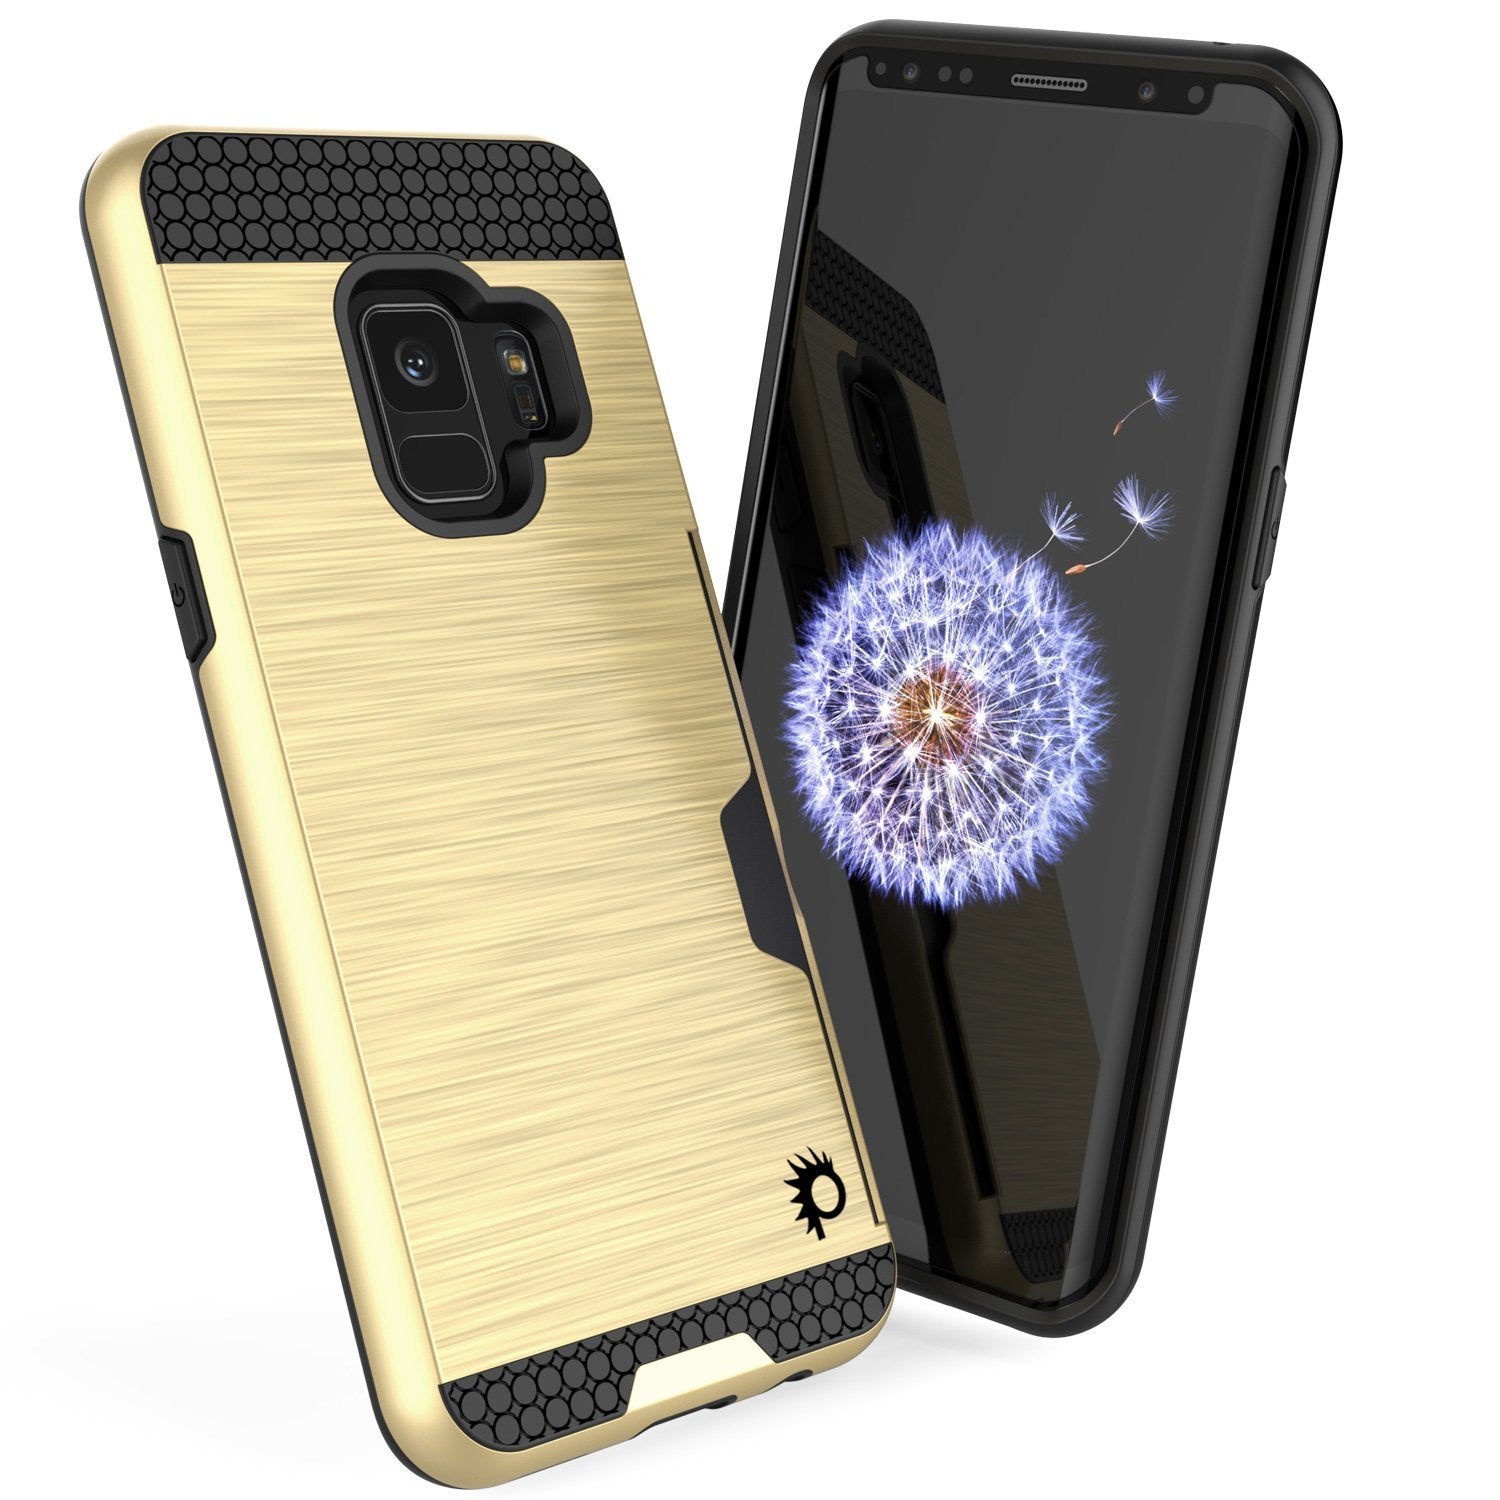 Galaxy S9 Case, PUNKcase [SLOT Series] [Slim Fit] Dual-Layer Armor Cover w/Integrated Anti-Shock System, Credit Card Slot [Gold] - PunkCase NZ